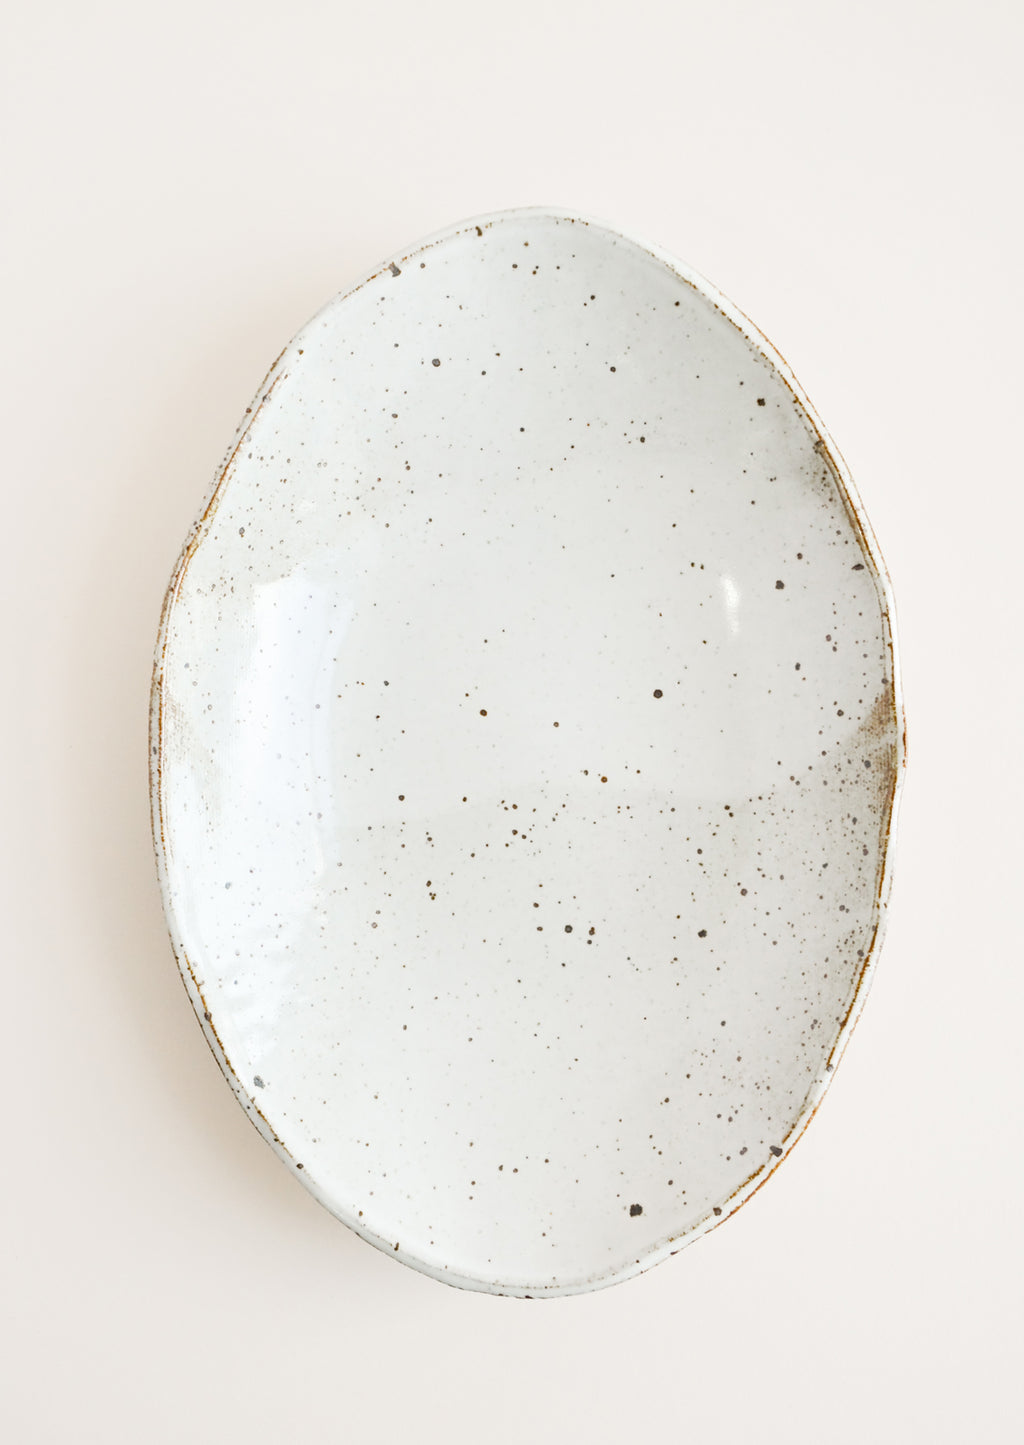 Glossy White: Rustic Ceramic Platter in Glossy White - LEIF